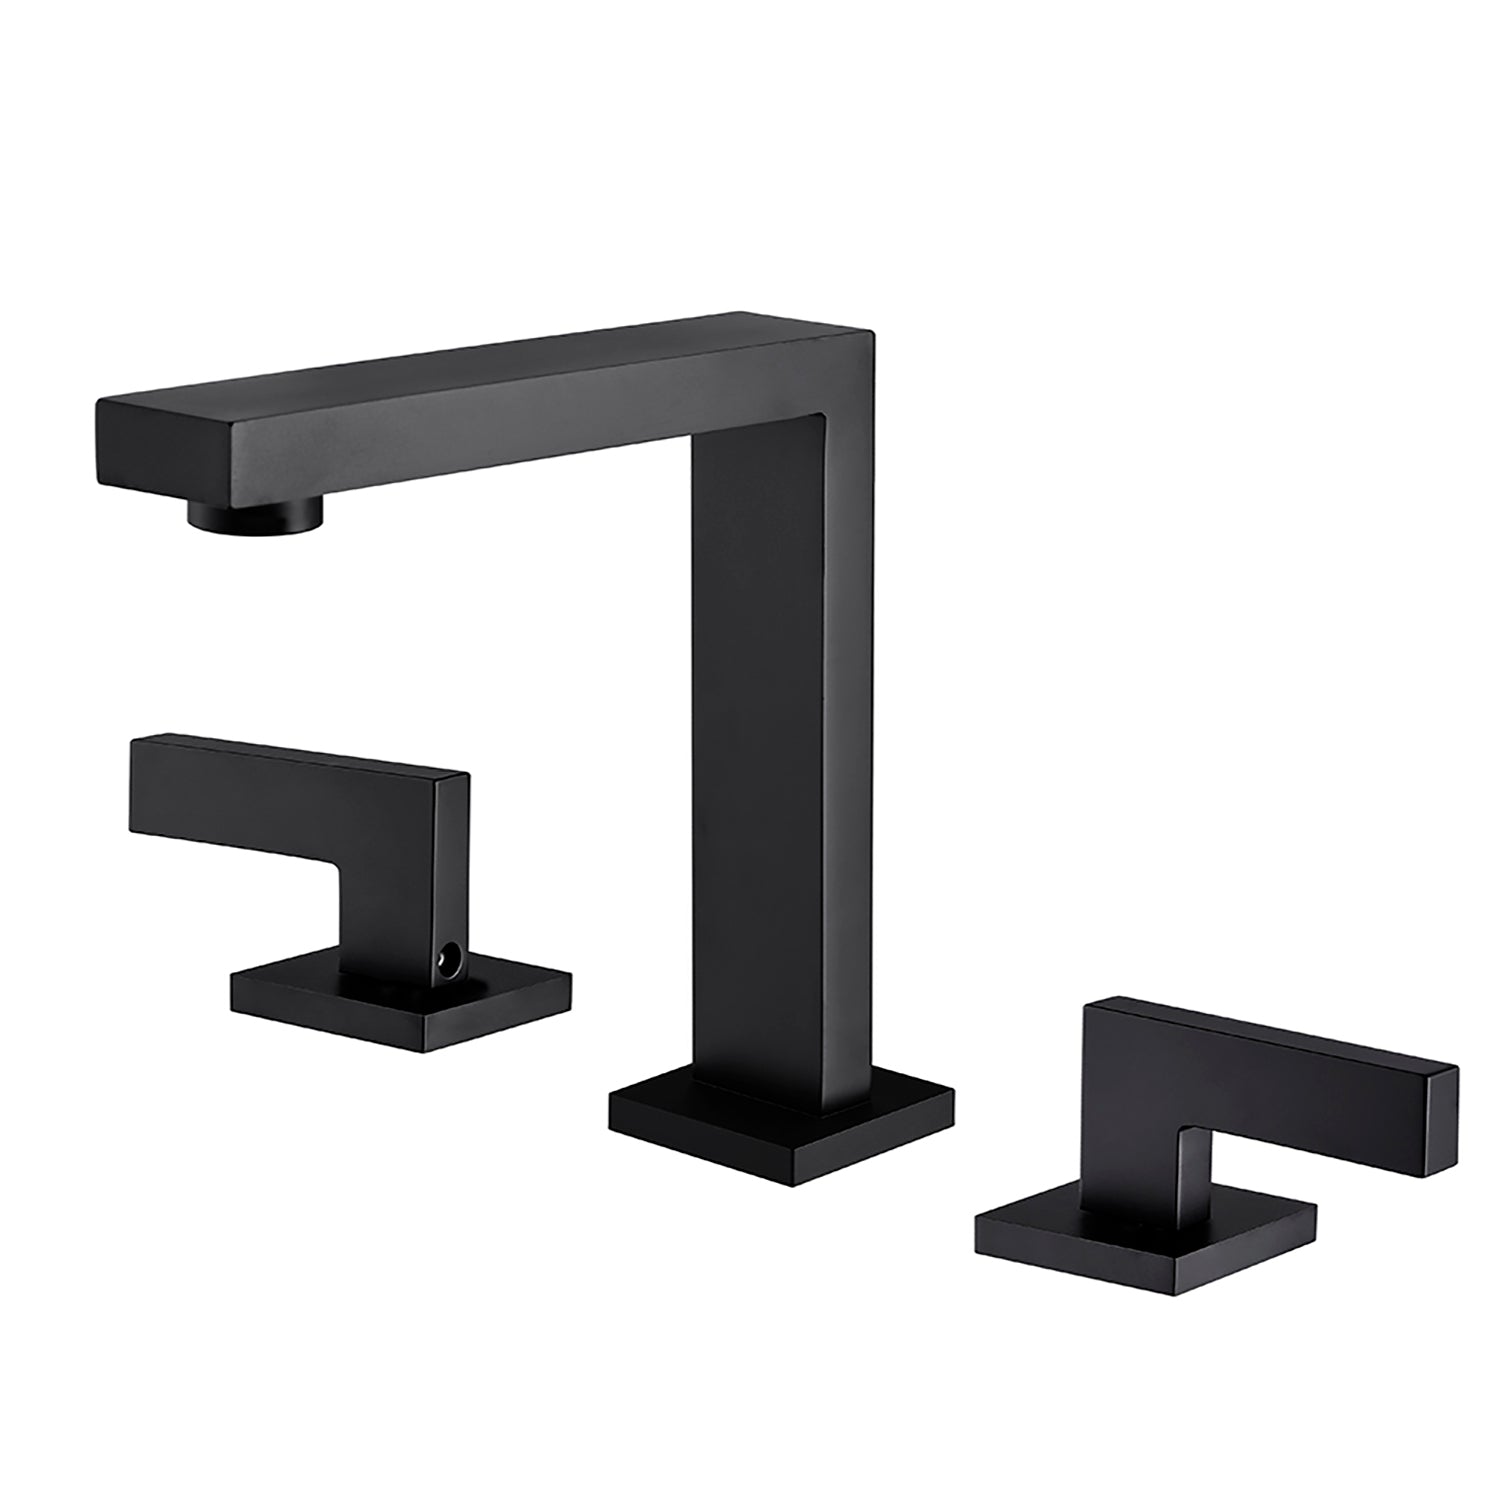 Boyel Living 8 in. Widespread 2-Handle High-Arc Bathroom Faucet with Ceramic Disk Valve in Matte Black